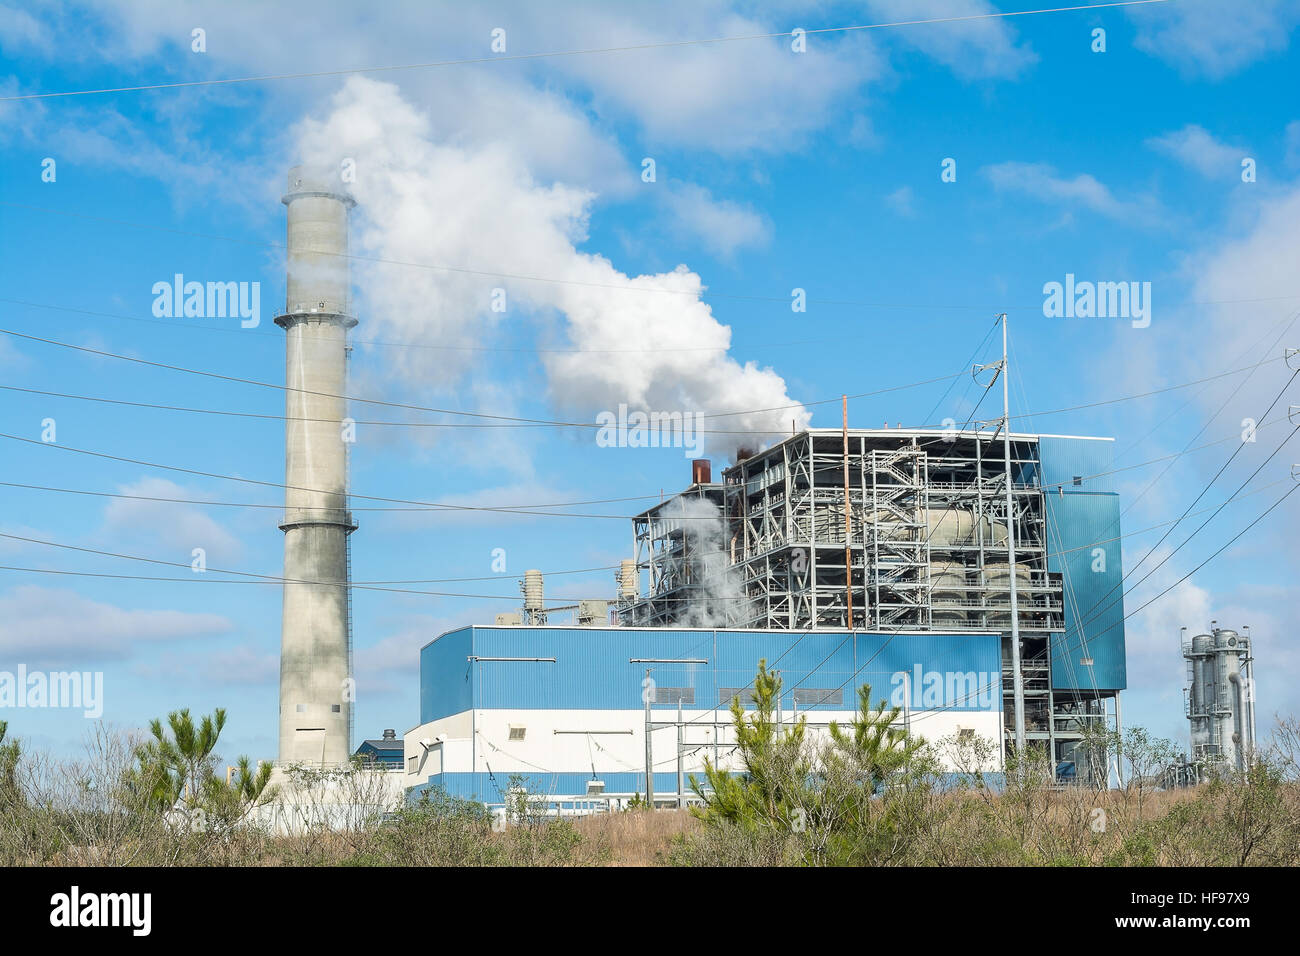 Electrical Power Infrastructure. Stock Photo